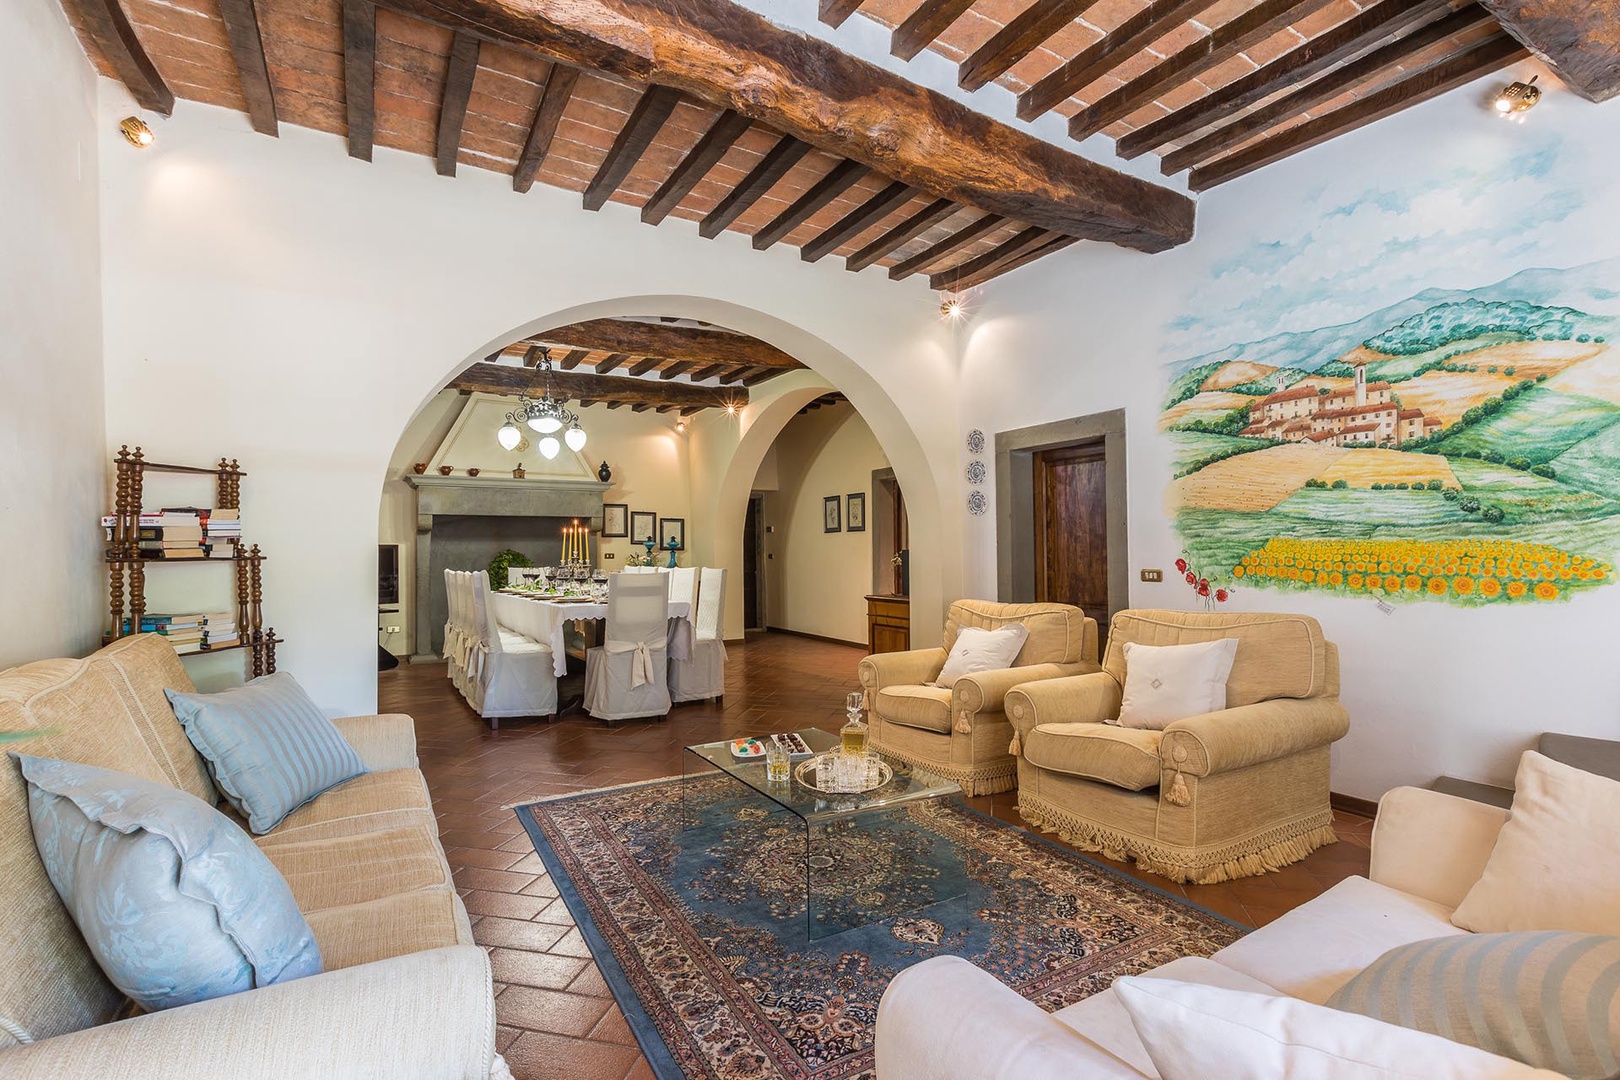 Comfortably furnished living room with beamed ceilings and terra cotta tile floors.